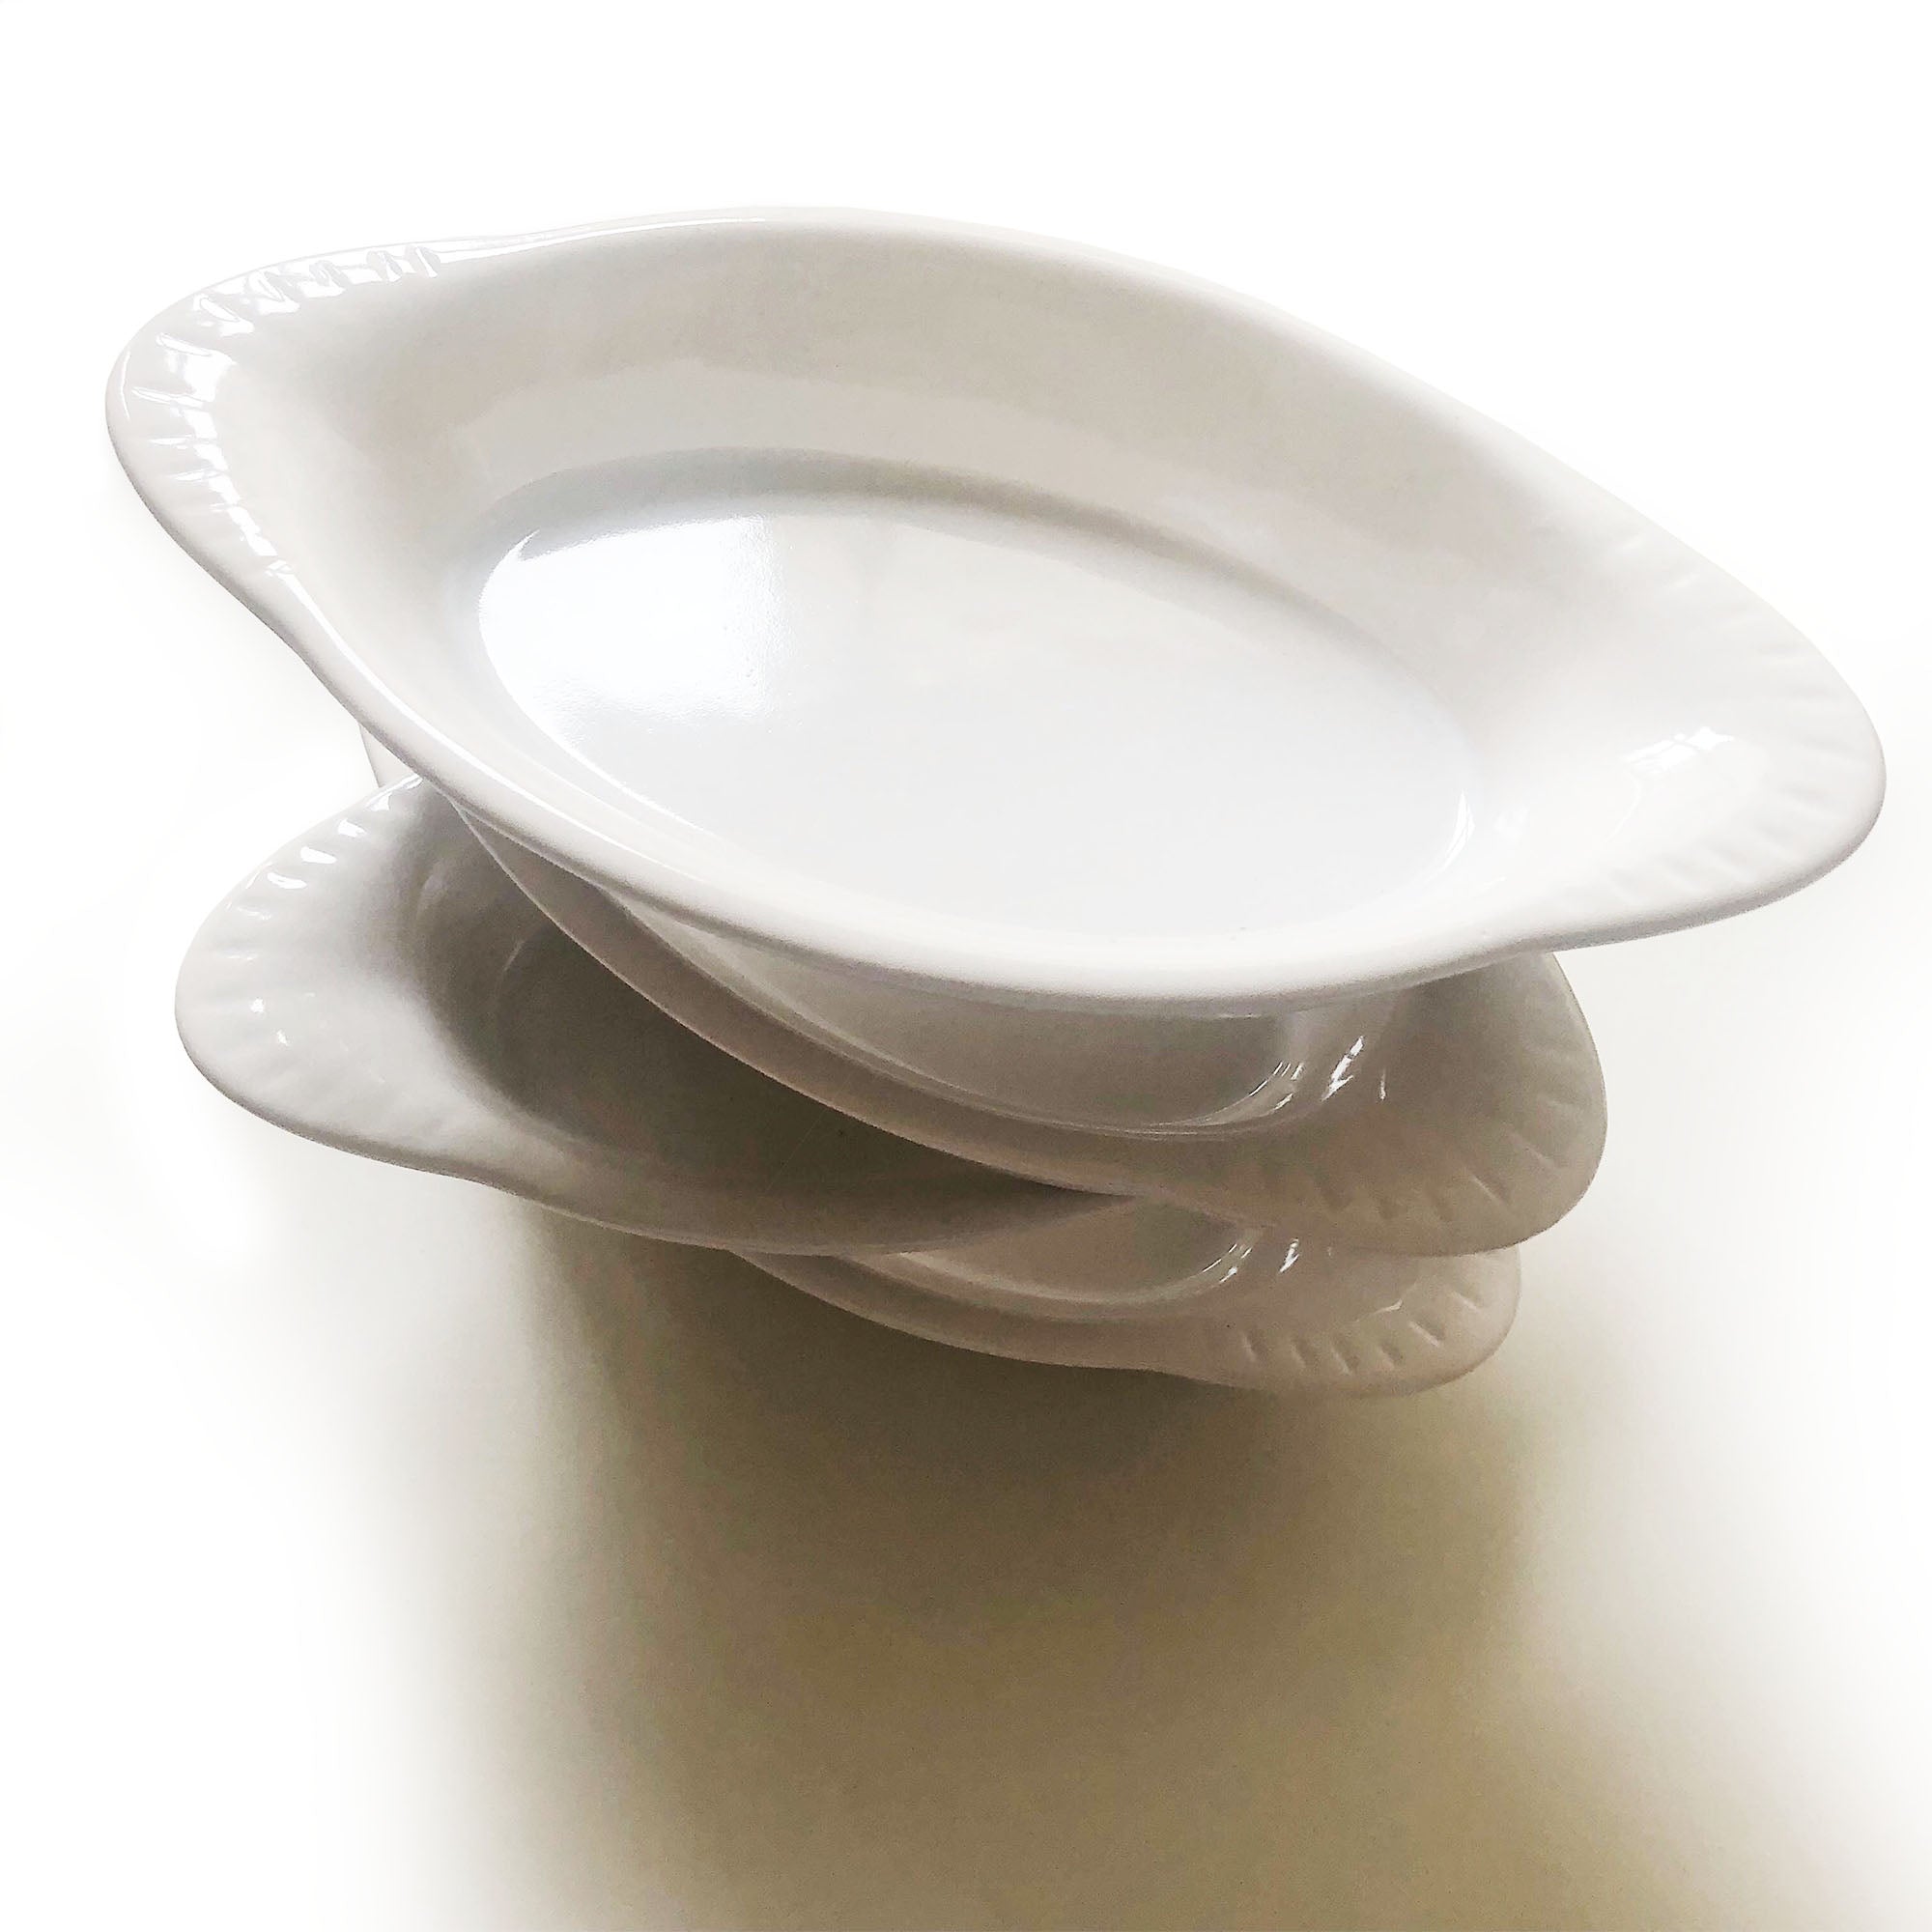 Classic Baking & Serving Dishes - Set of 4